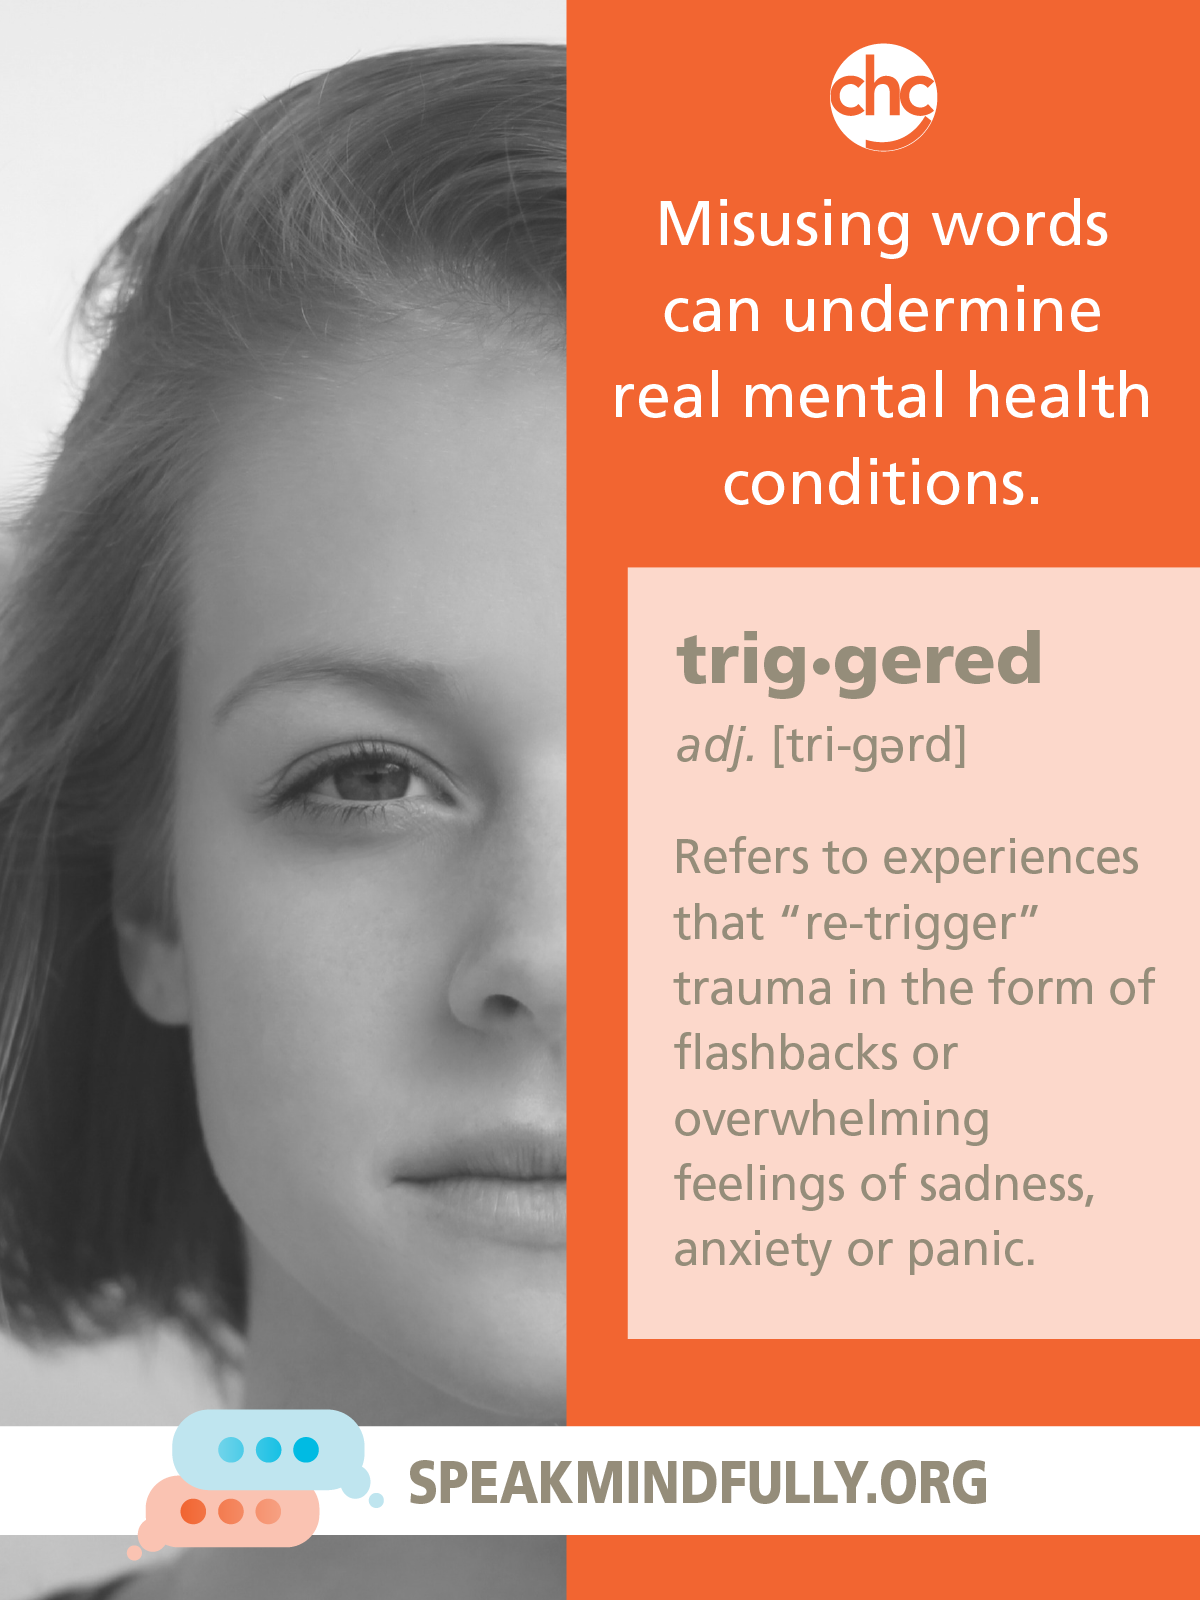 Speak Mindfully poster about triggered